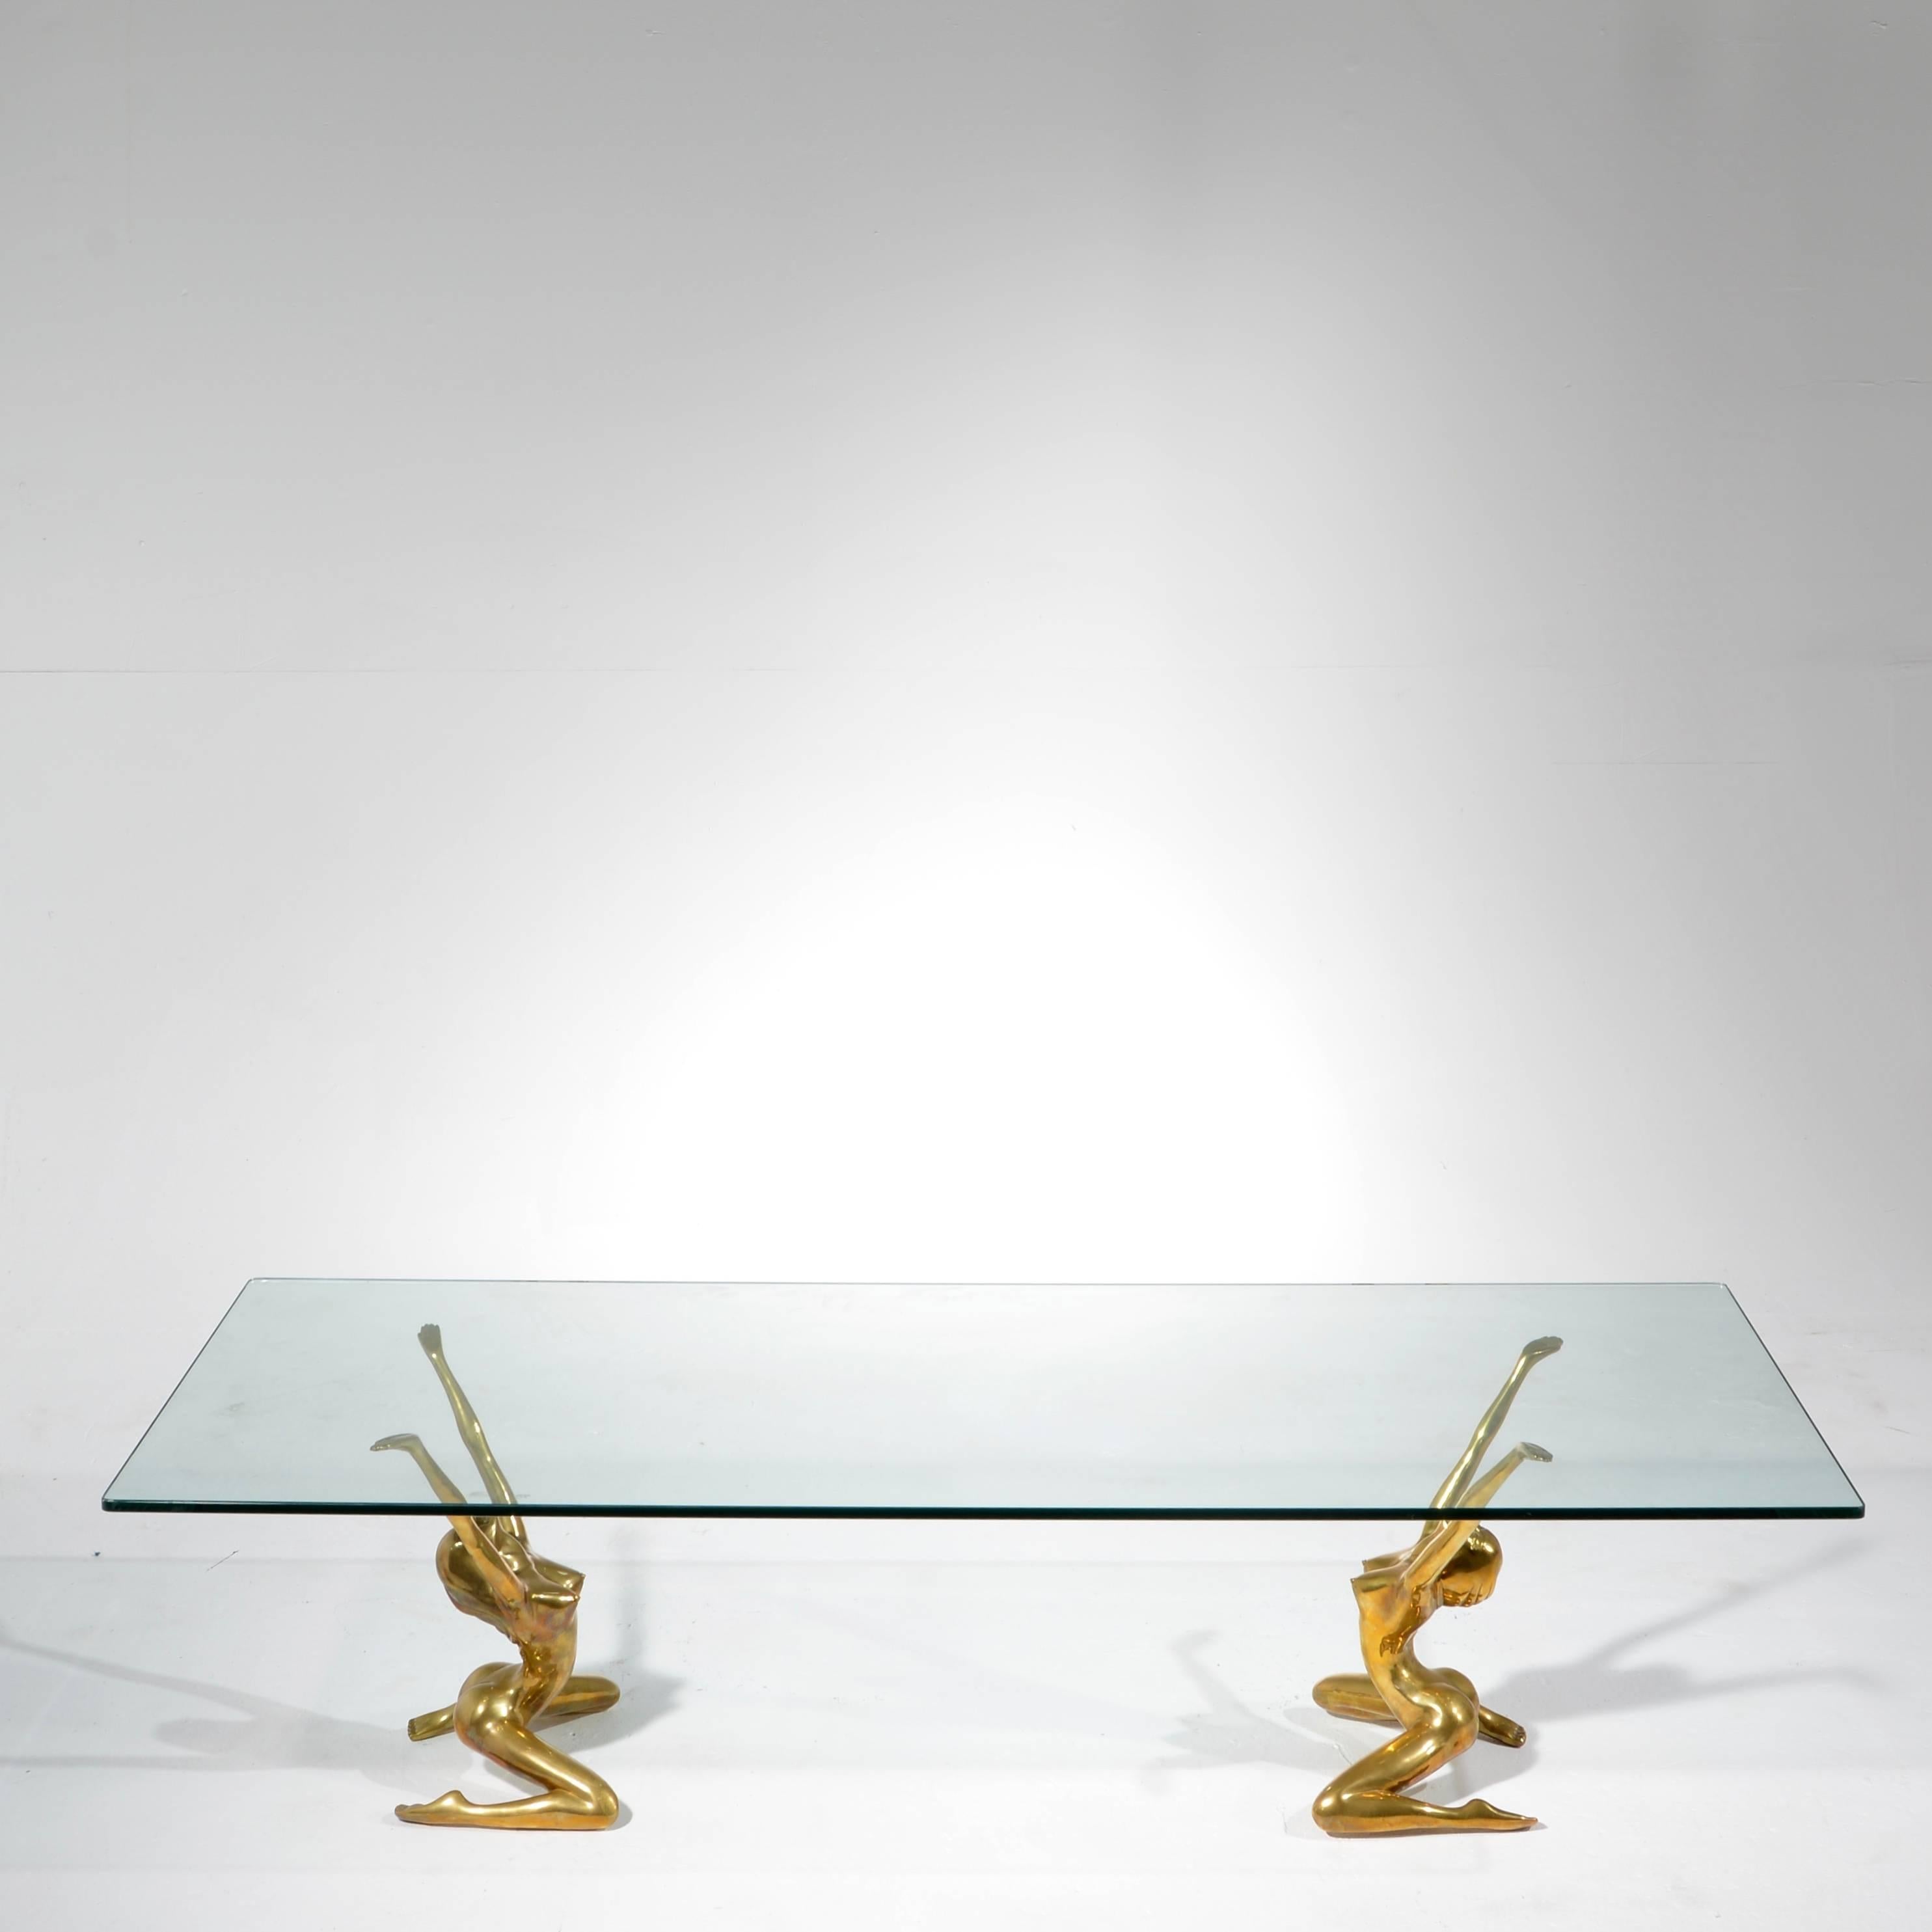 This is an amazing modernist table in cast brass. The basses can be used with many different shapes of glass table tops.